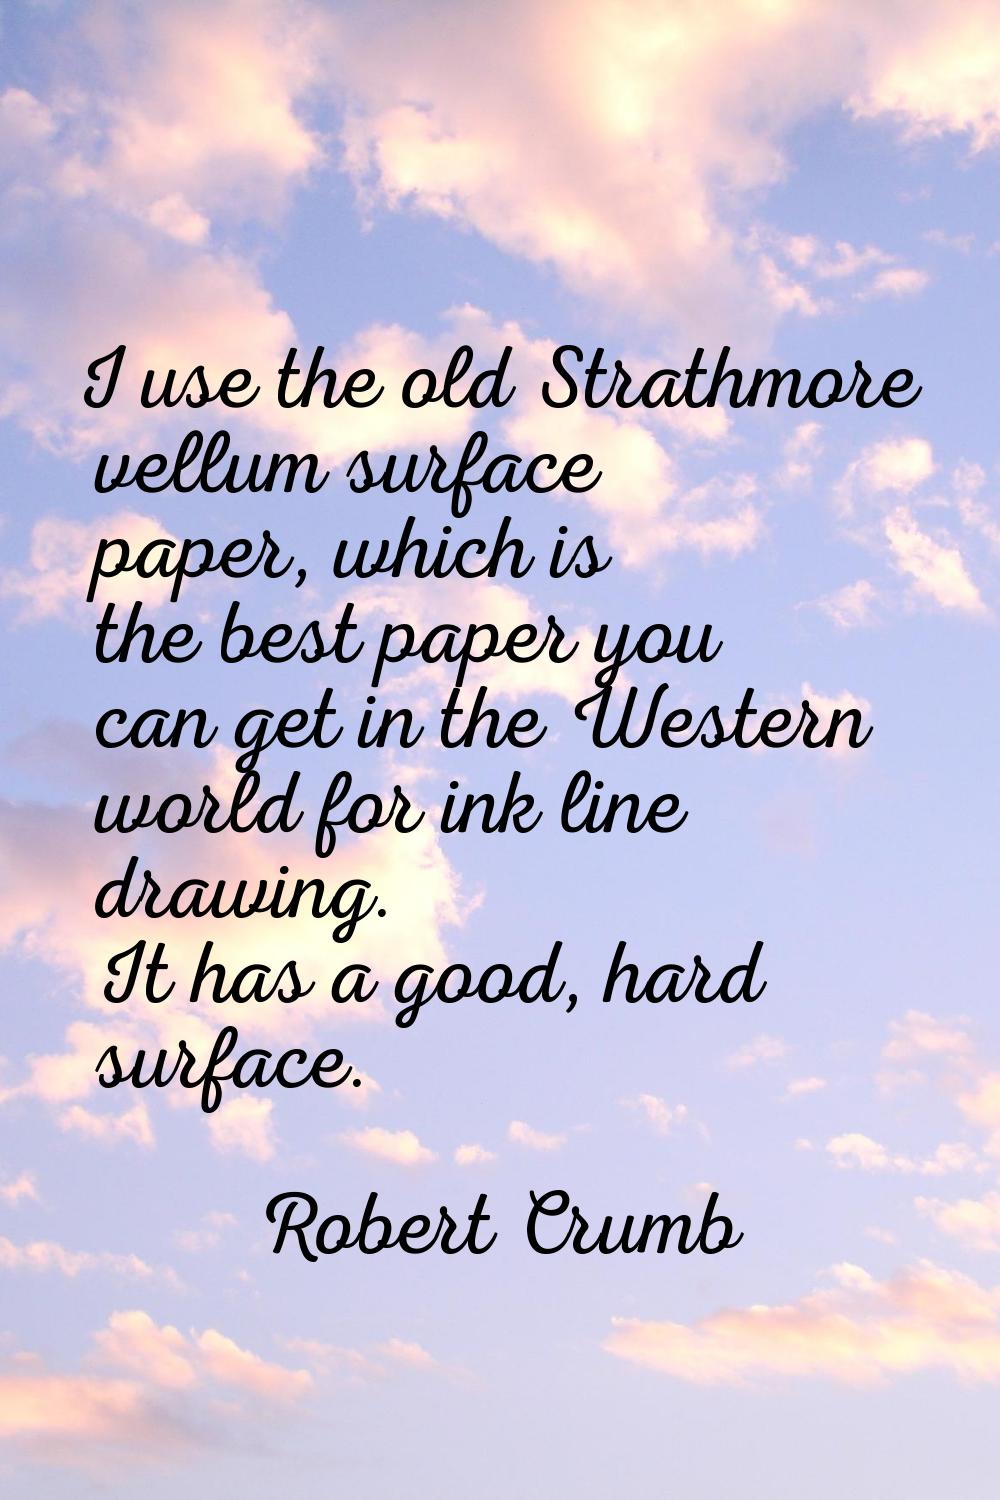 I use the old Strathmore vellum surface paper, which is the best paper you can get in the Western w